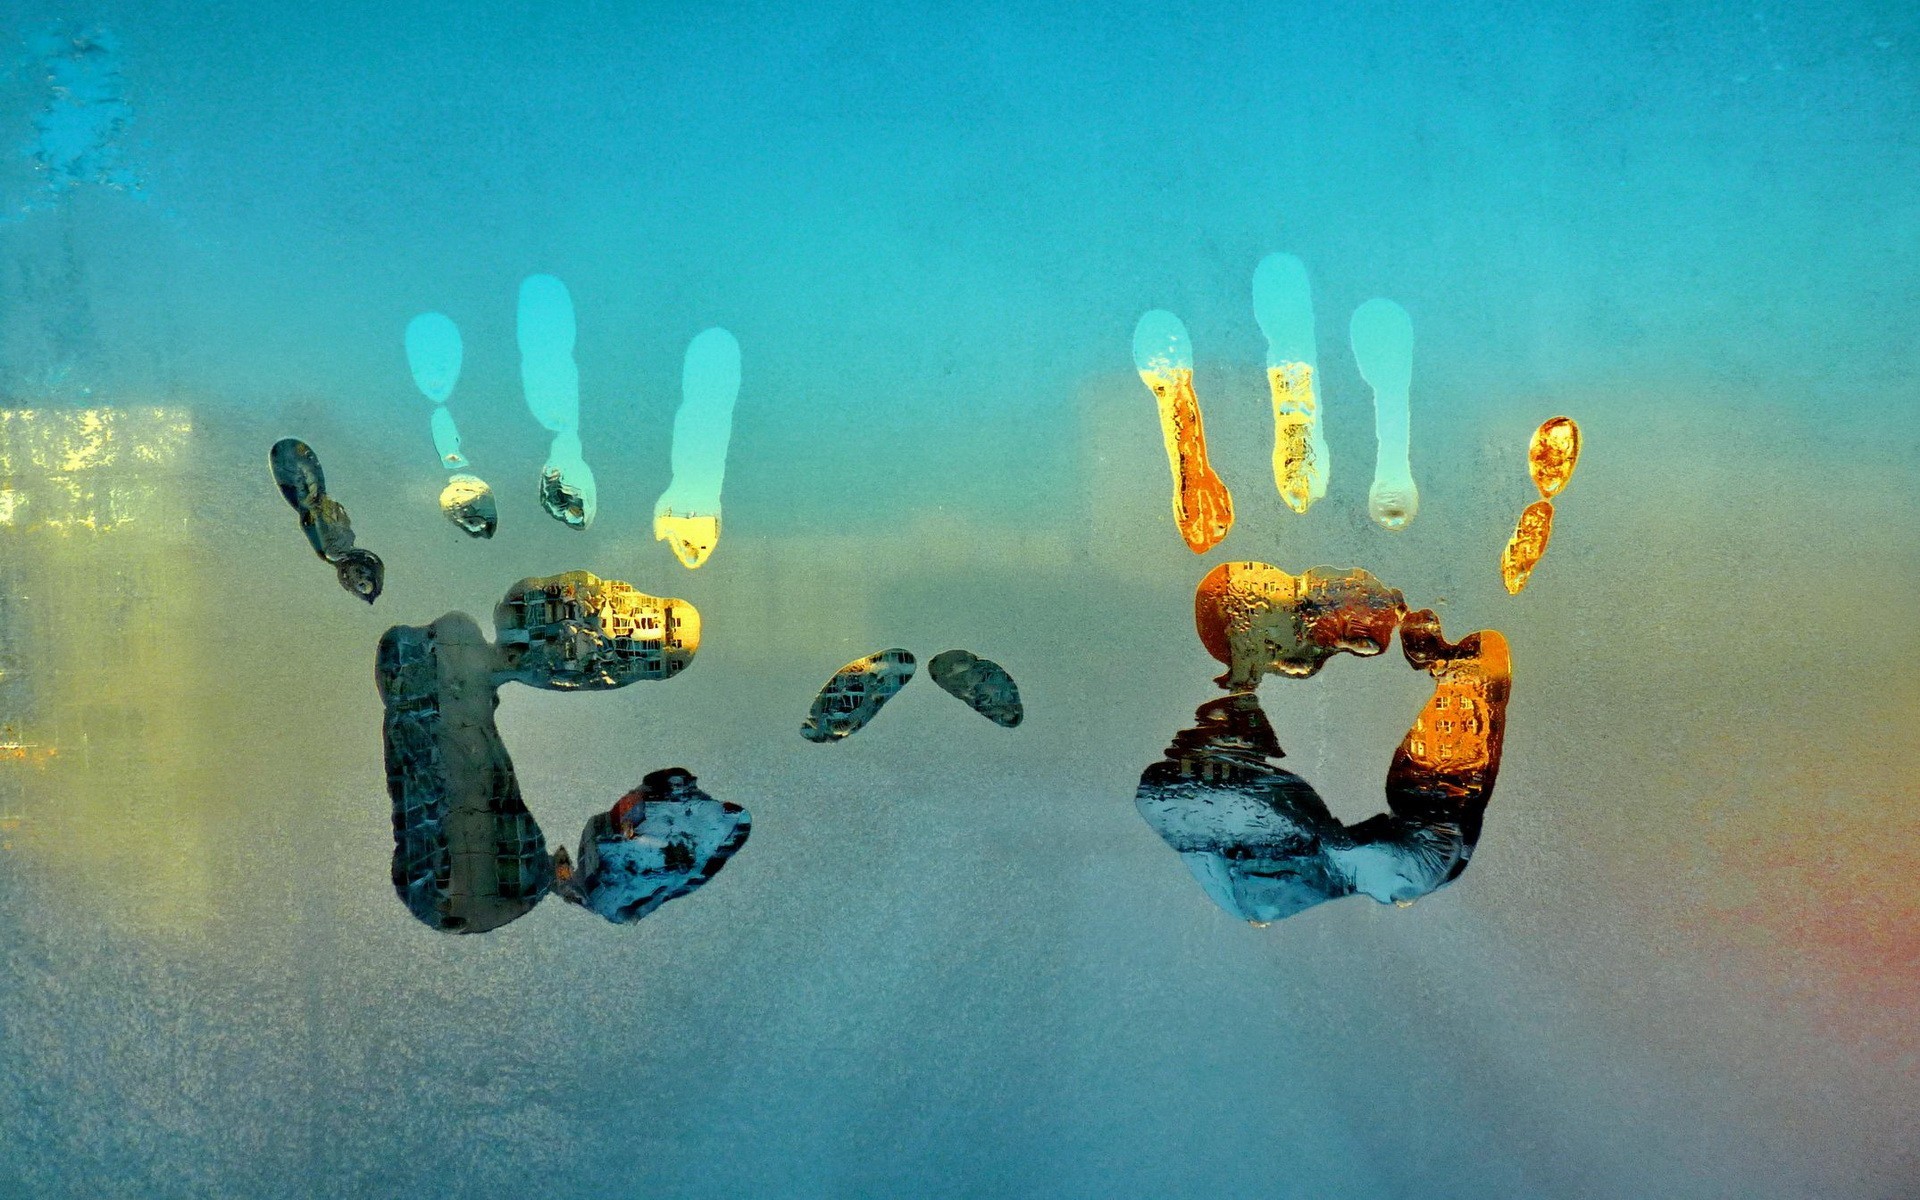 Photography Window Frost Glass Hands Handprints Water On Glass Wet Cyan Turquoise Morning 1920x1200